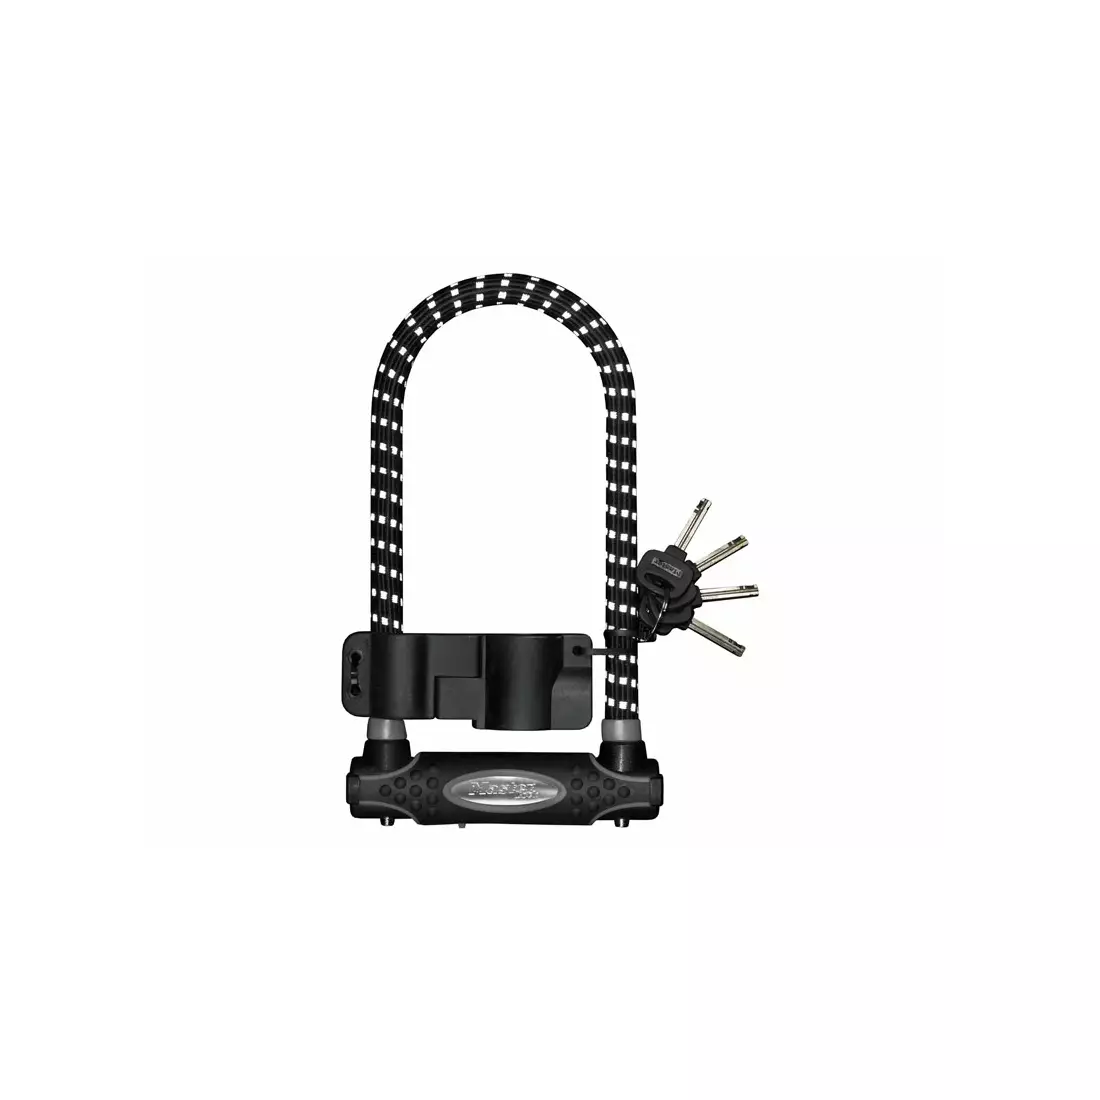 MASTERLOCK 8195LW U-LOCK bicycle lock 13mm 110mm 280mm KEY covered with rubber with reflection black MRL-8195EURDPROLWREF SS16